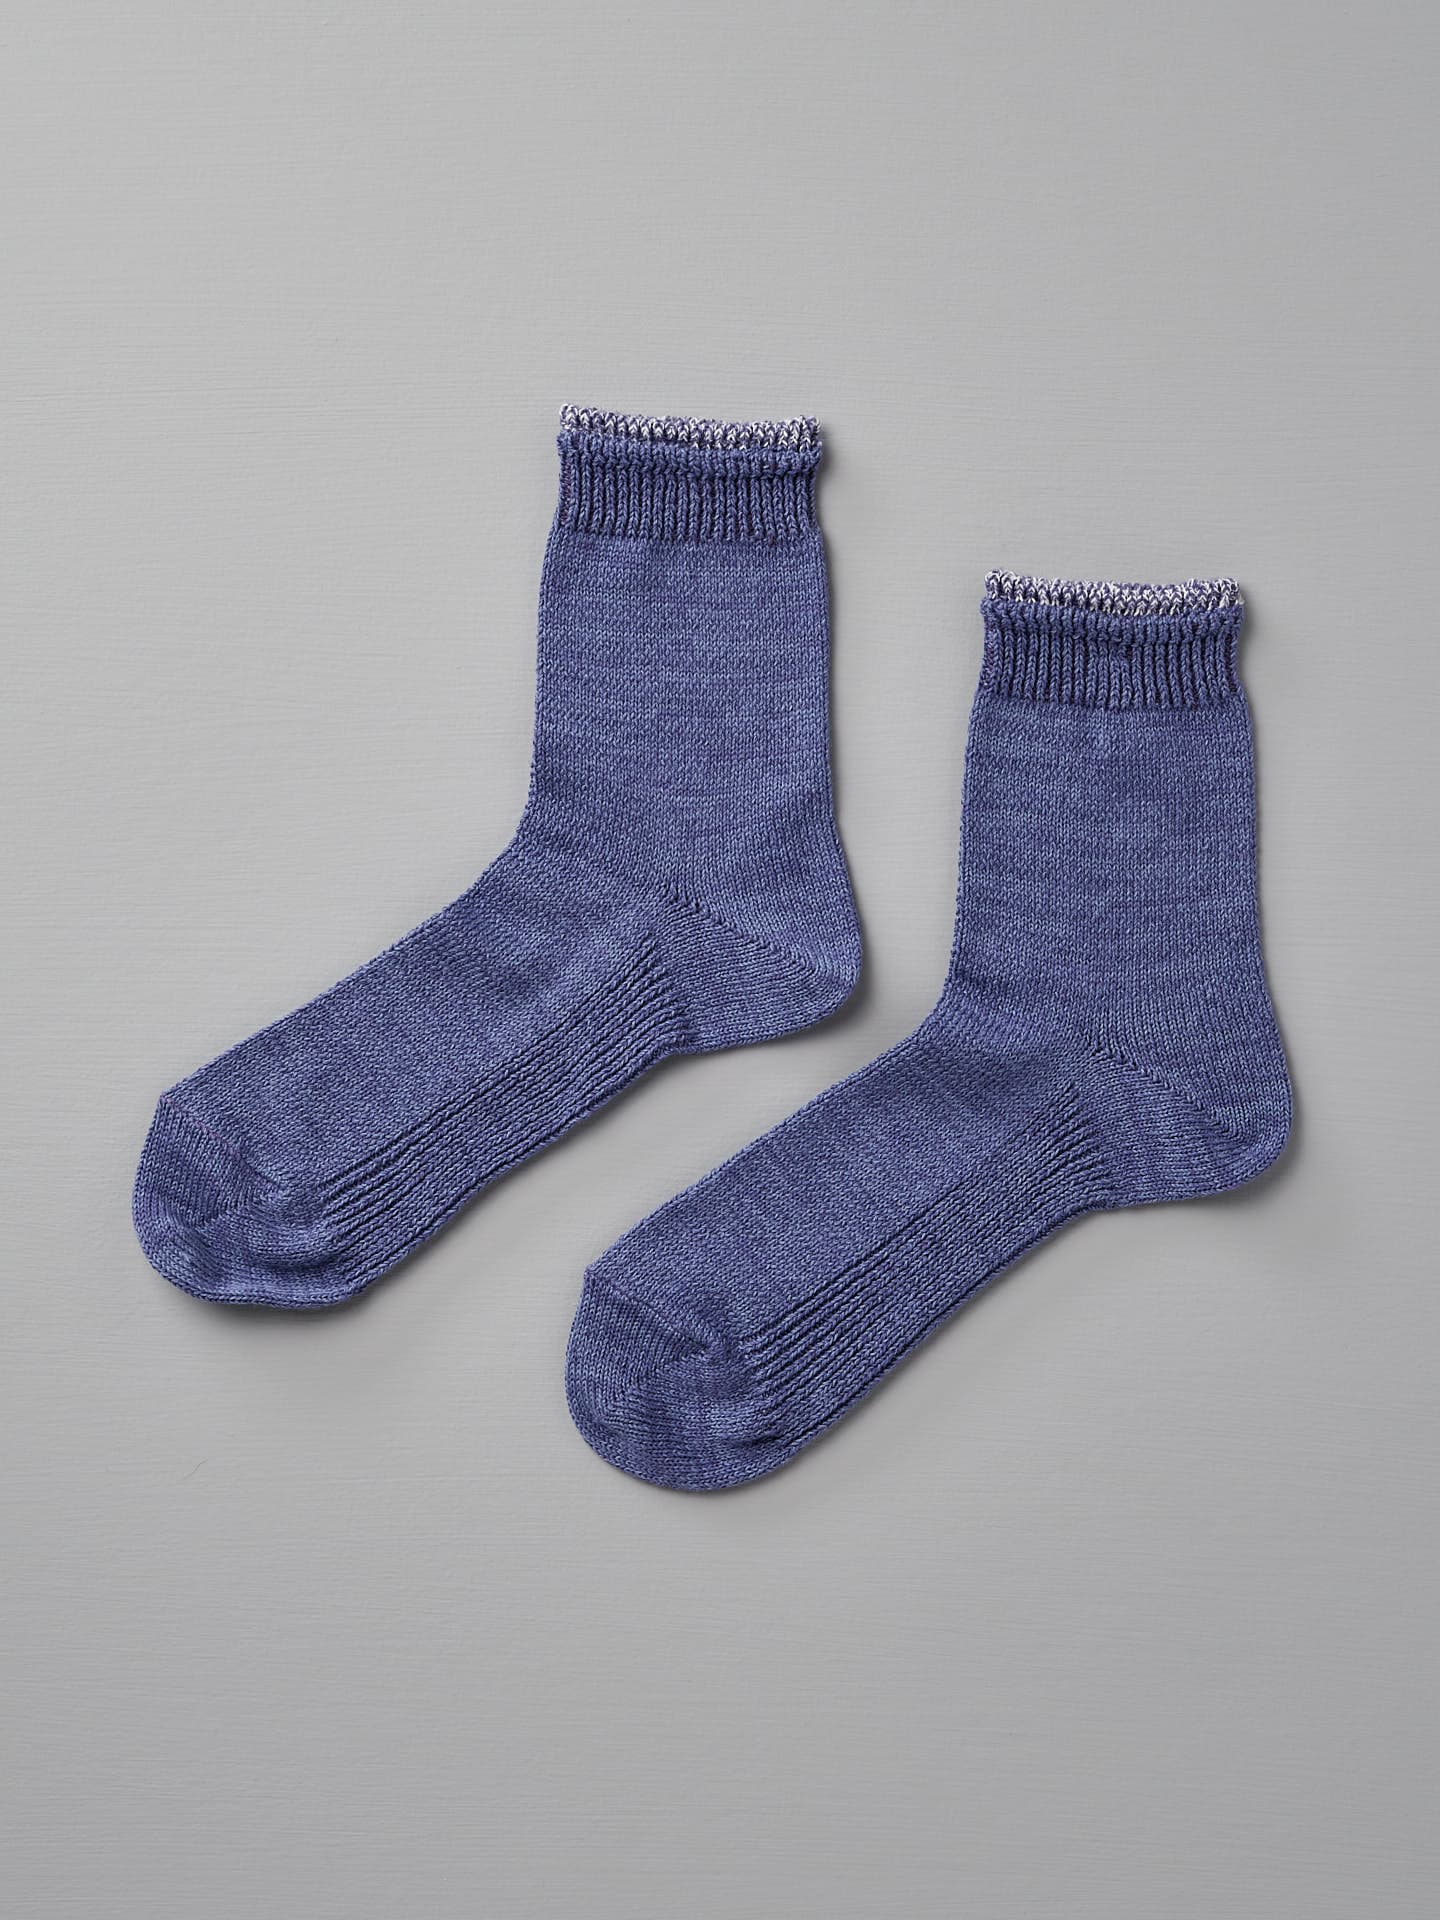 Pair of Mauna Kea Organic Top Switching Socks – Purple, sized EUR 39—42, placed side-by-side on a light gray background.